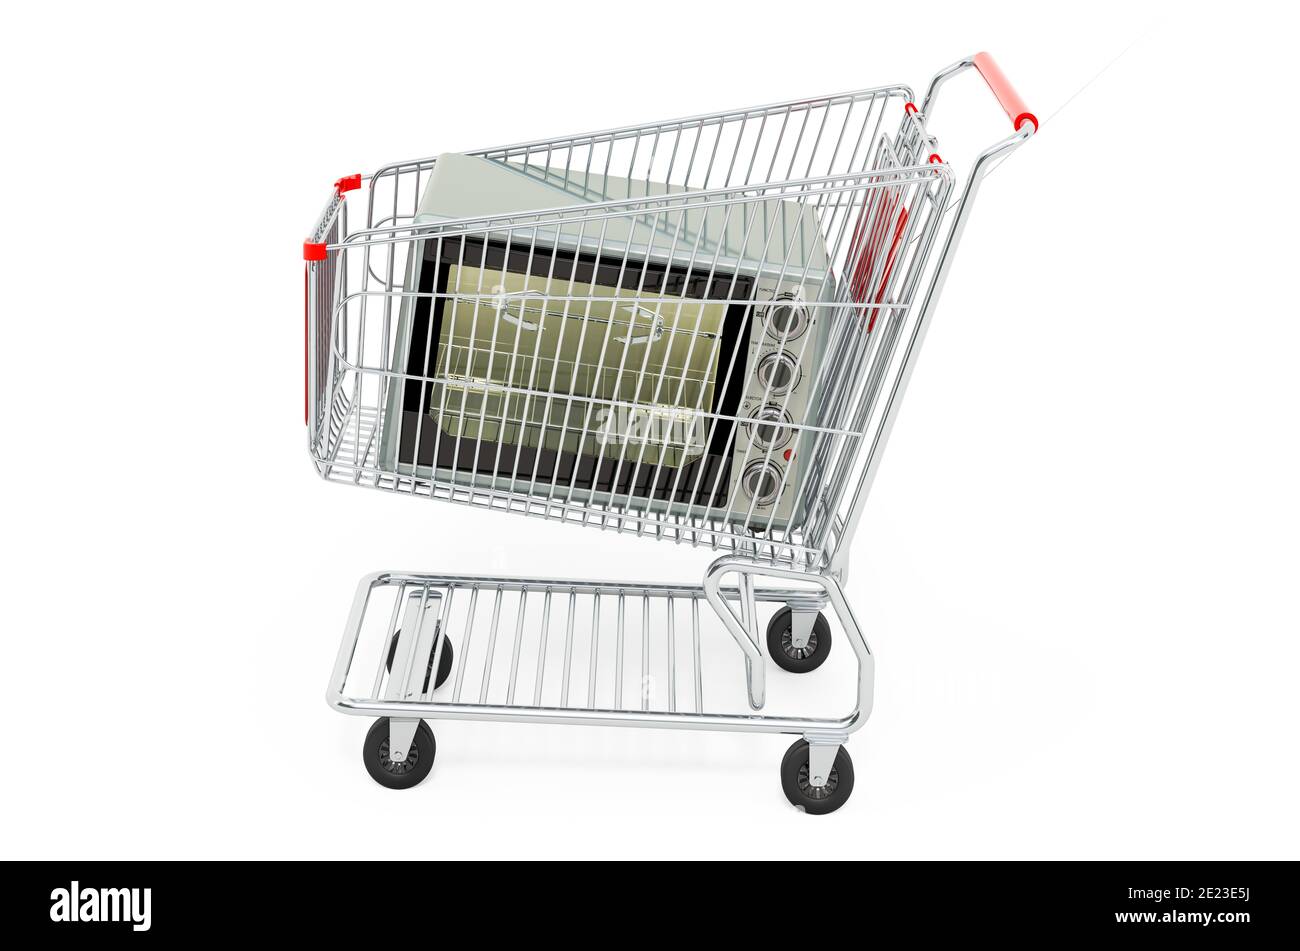 Convection toaster oven inside shopping cart, 3D rendering isolated on white background Stock Photo